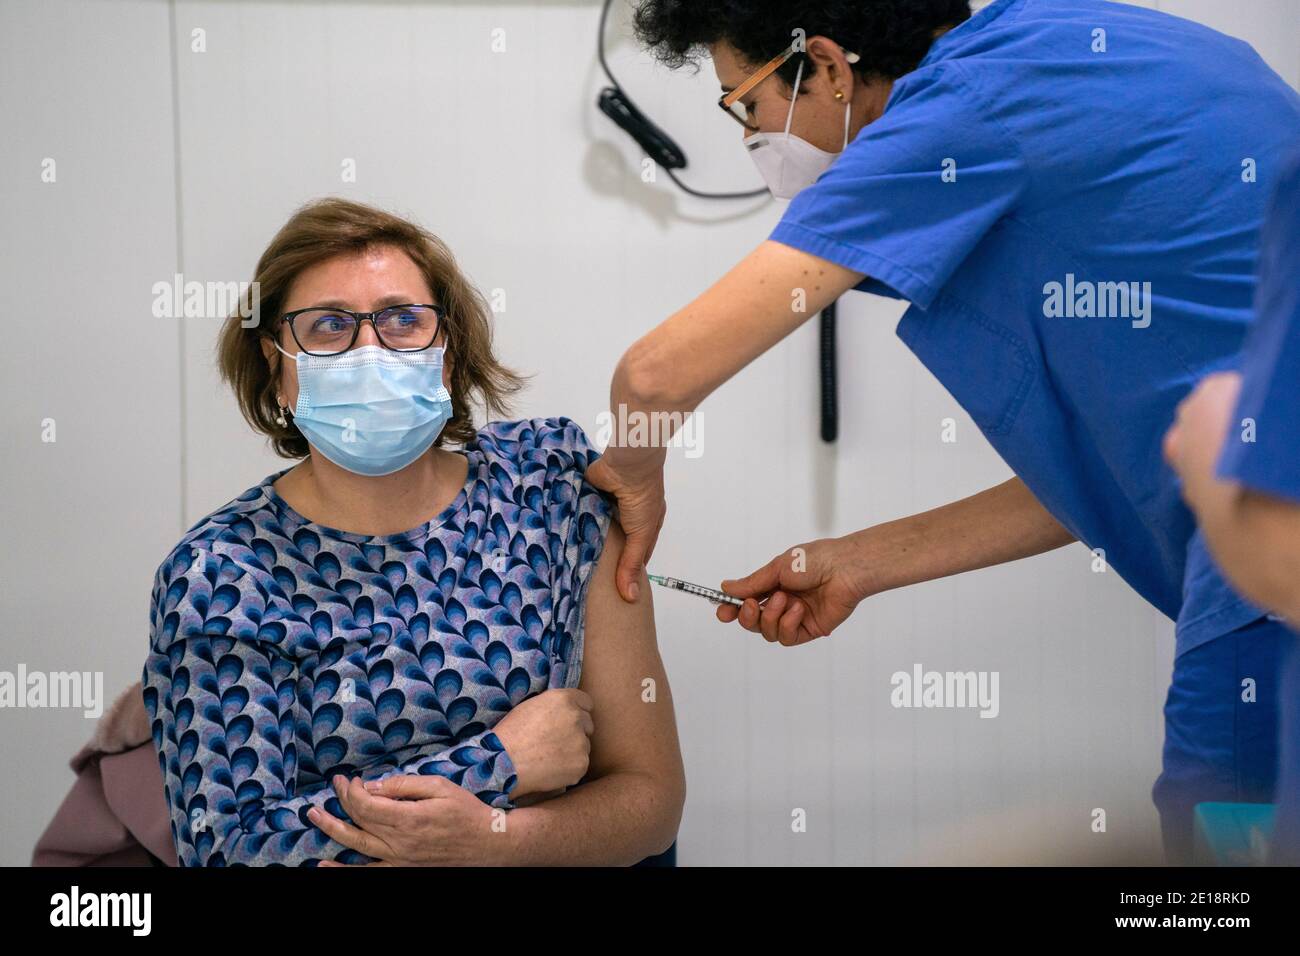 Nurse vaccinating a woman with the Covid 19 vaccine Stock Photo